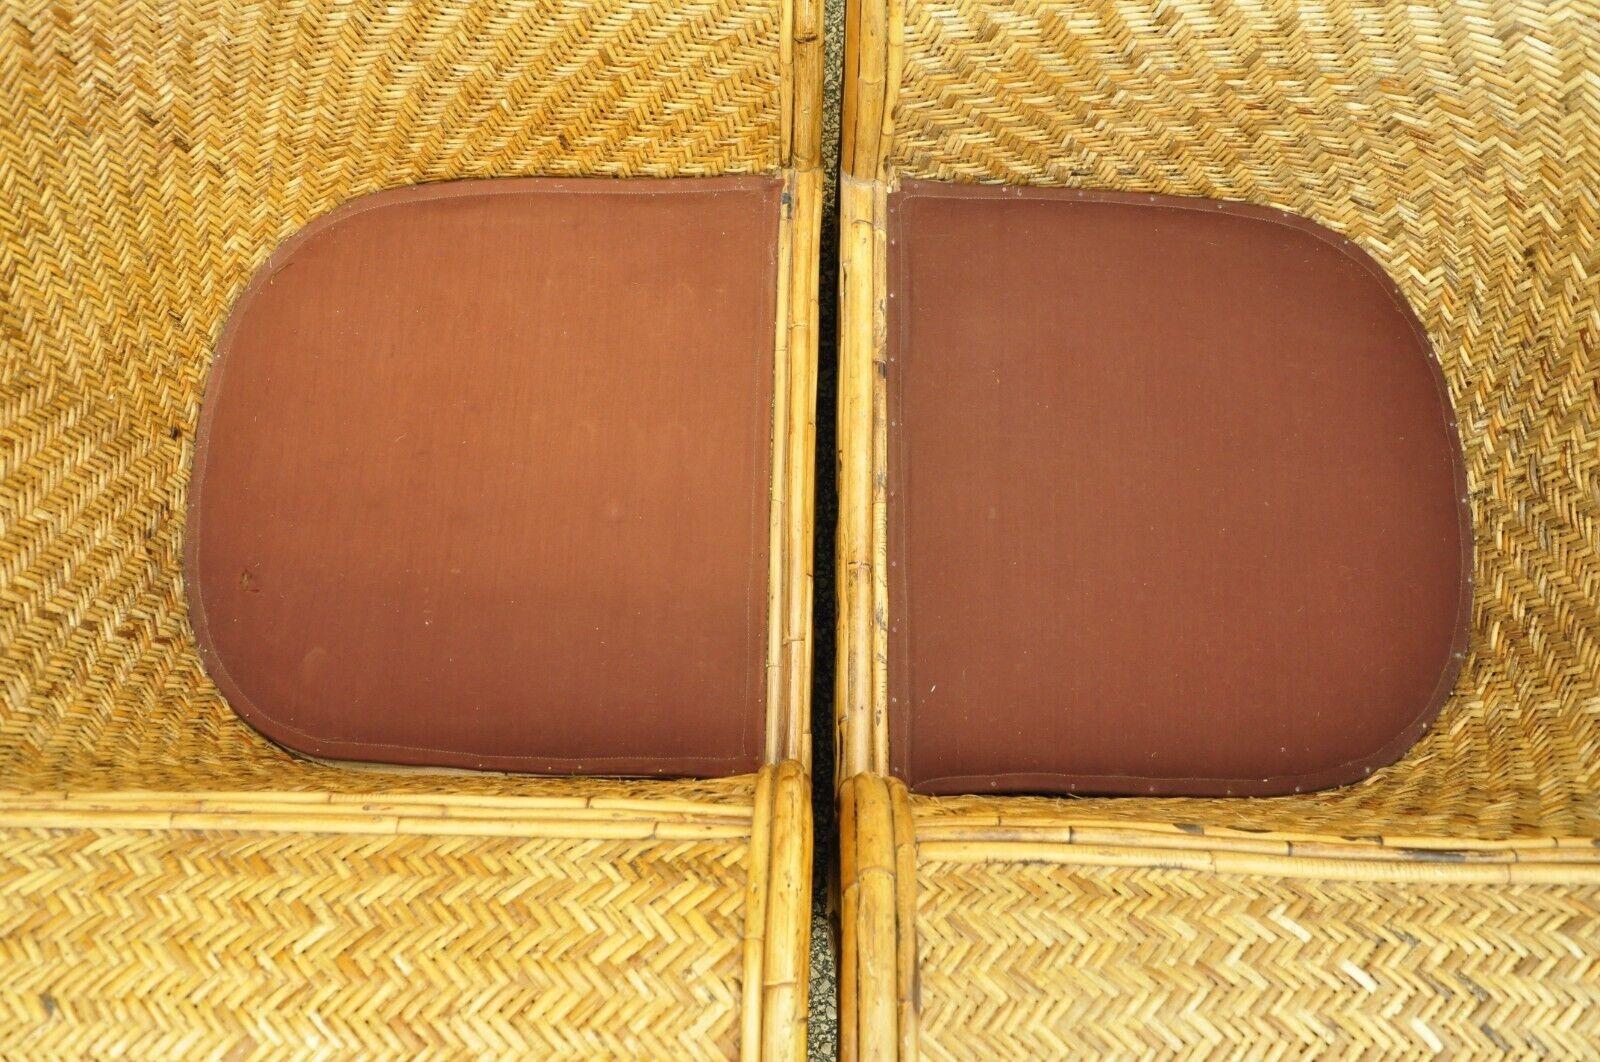 Ralph Lauren Attr. Large Woven Wicker Rattan Club Lounge Chairs - a Pair For Sale 4